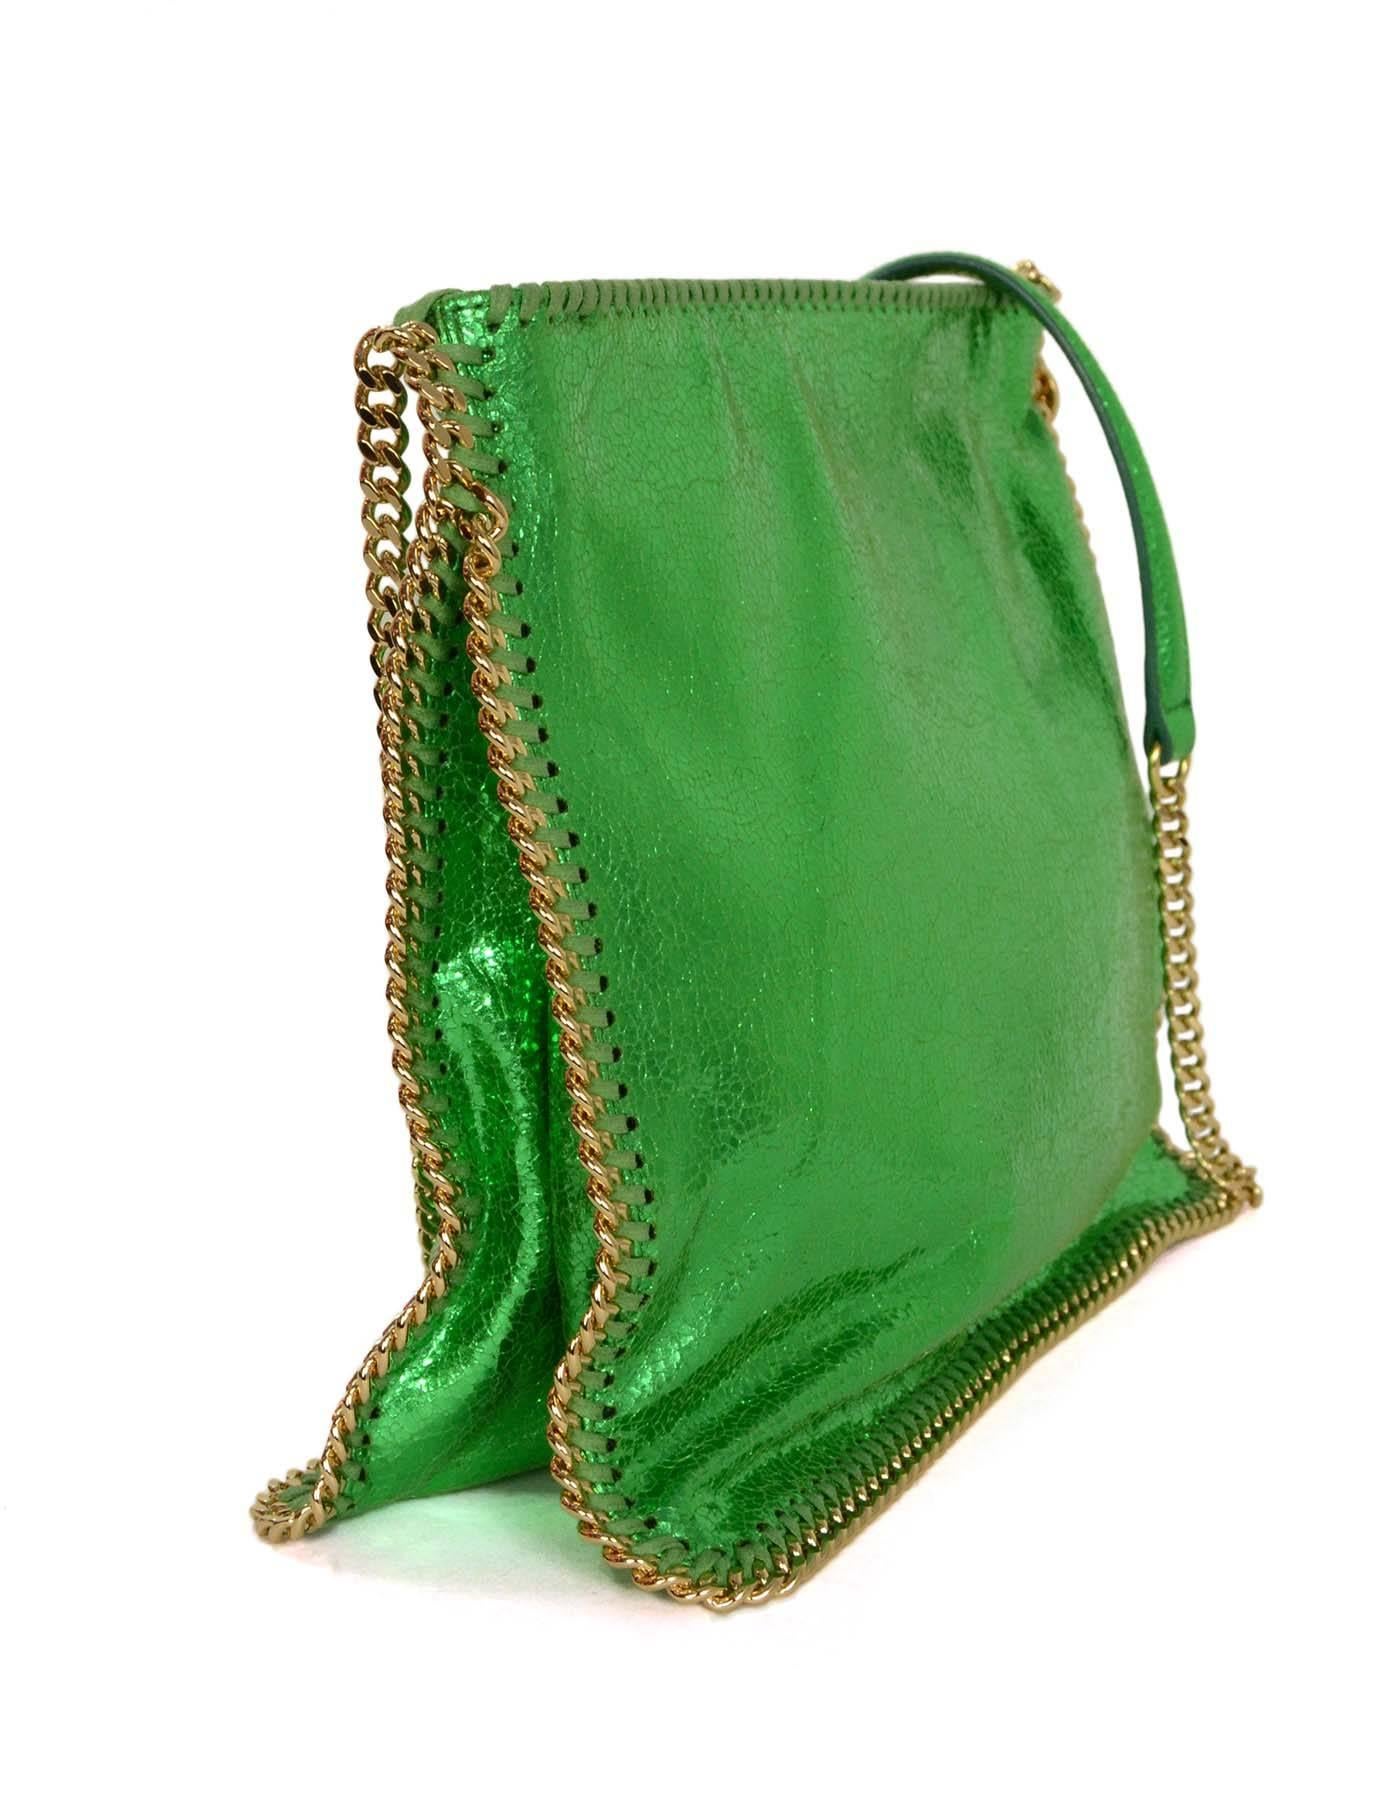 Stella McCartney Metallic Green Falabella Crossbody Bag 
Features goldtone chain around detailing
Made In: Italy
Color: Peacock green
Hardware: Goldtone
Materials: Vegan leather
Lining: Black nylon
Closure/Opening: Zip across top
Exterior